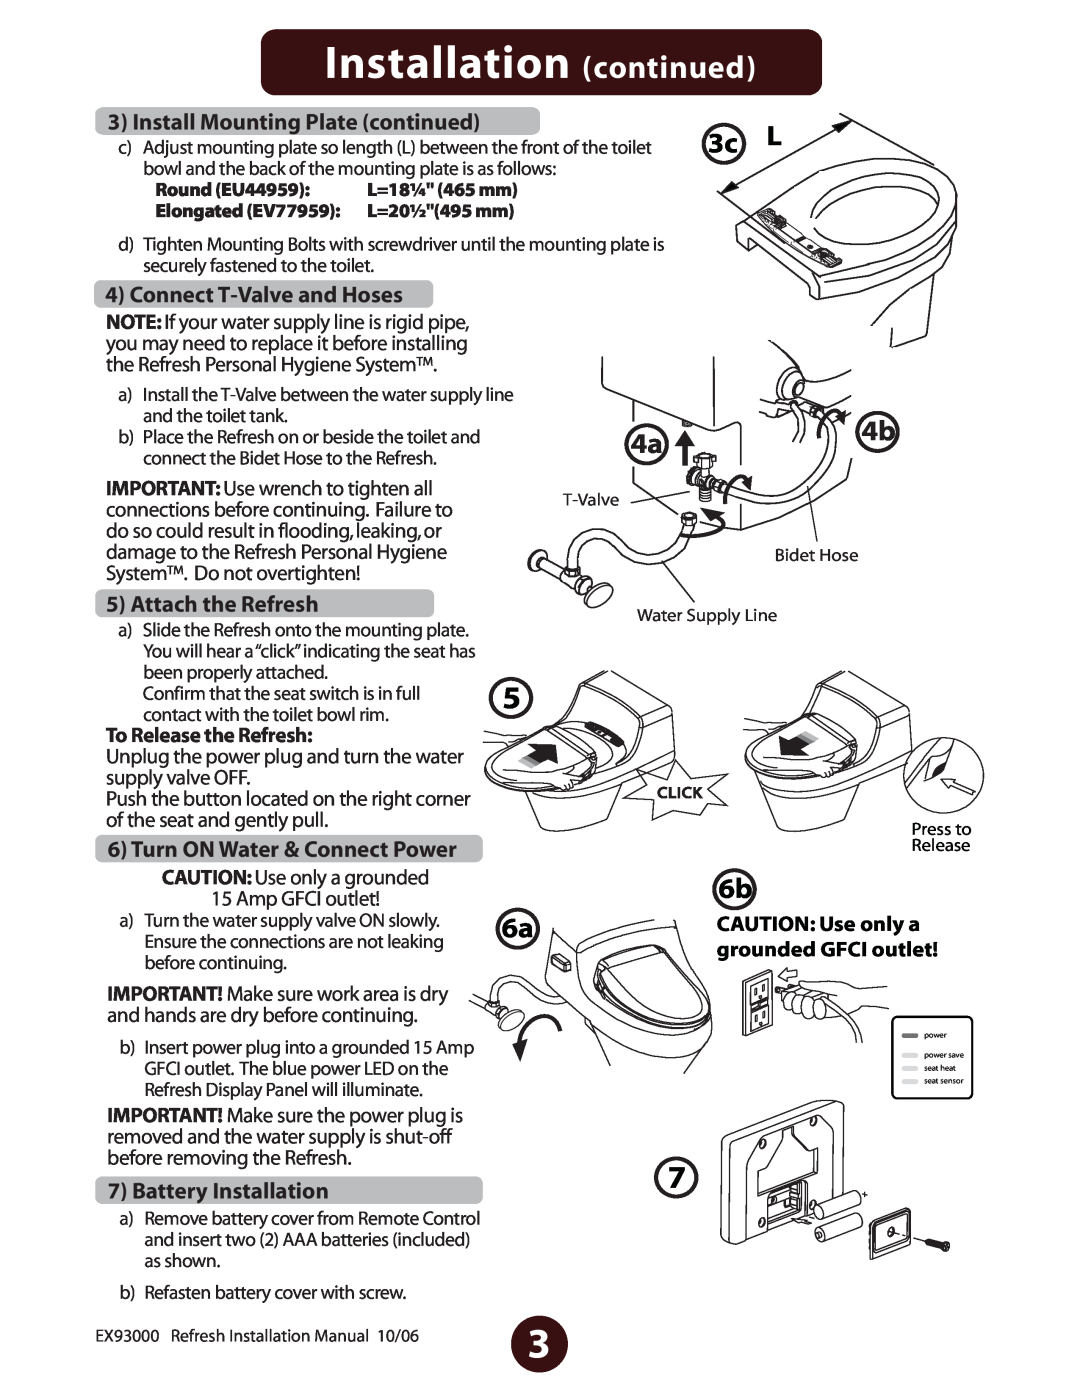 Jacuzzi EV77959 owner manual Installation continued, 3c L, Install Mounting Plate continued, Connect T-Valveand Hoses 